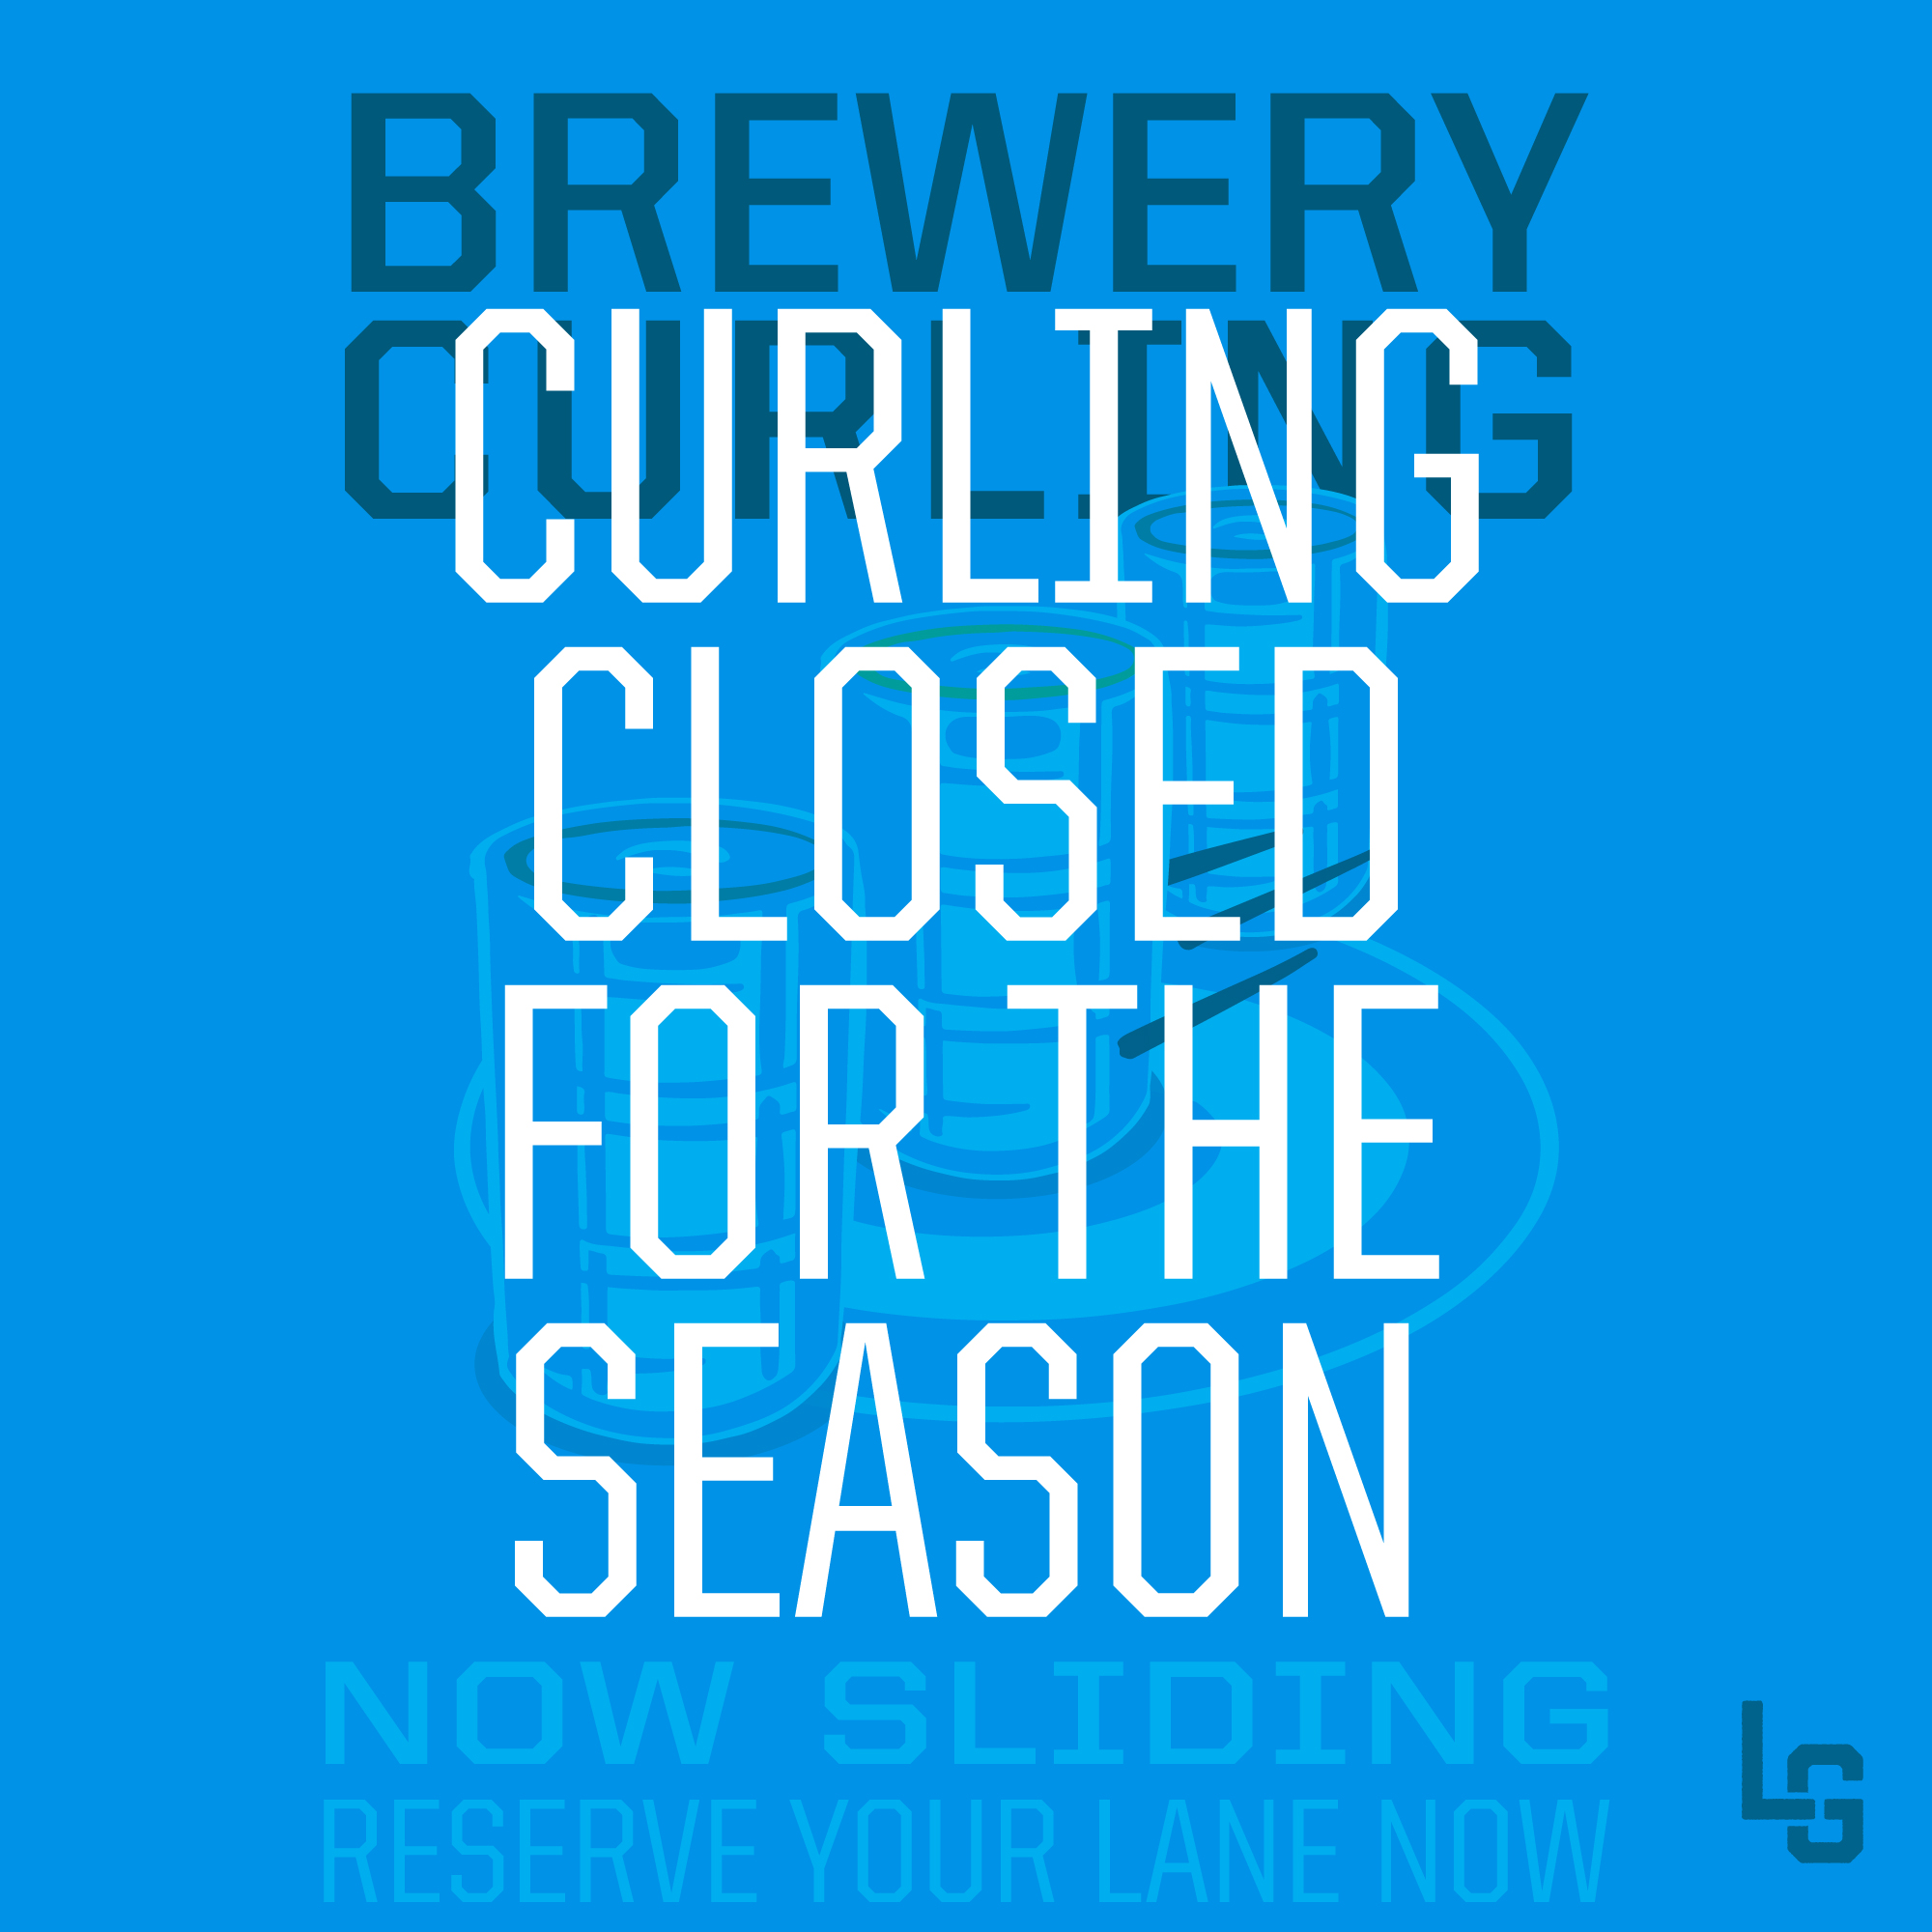 Brewery Curling at Land-Grant